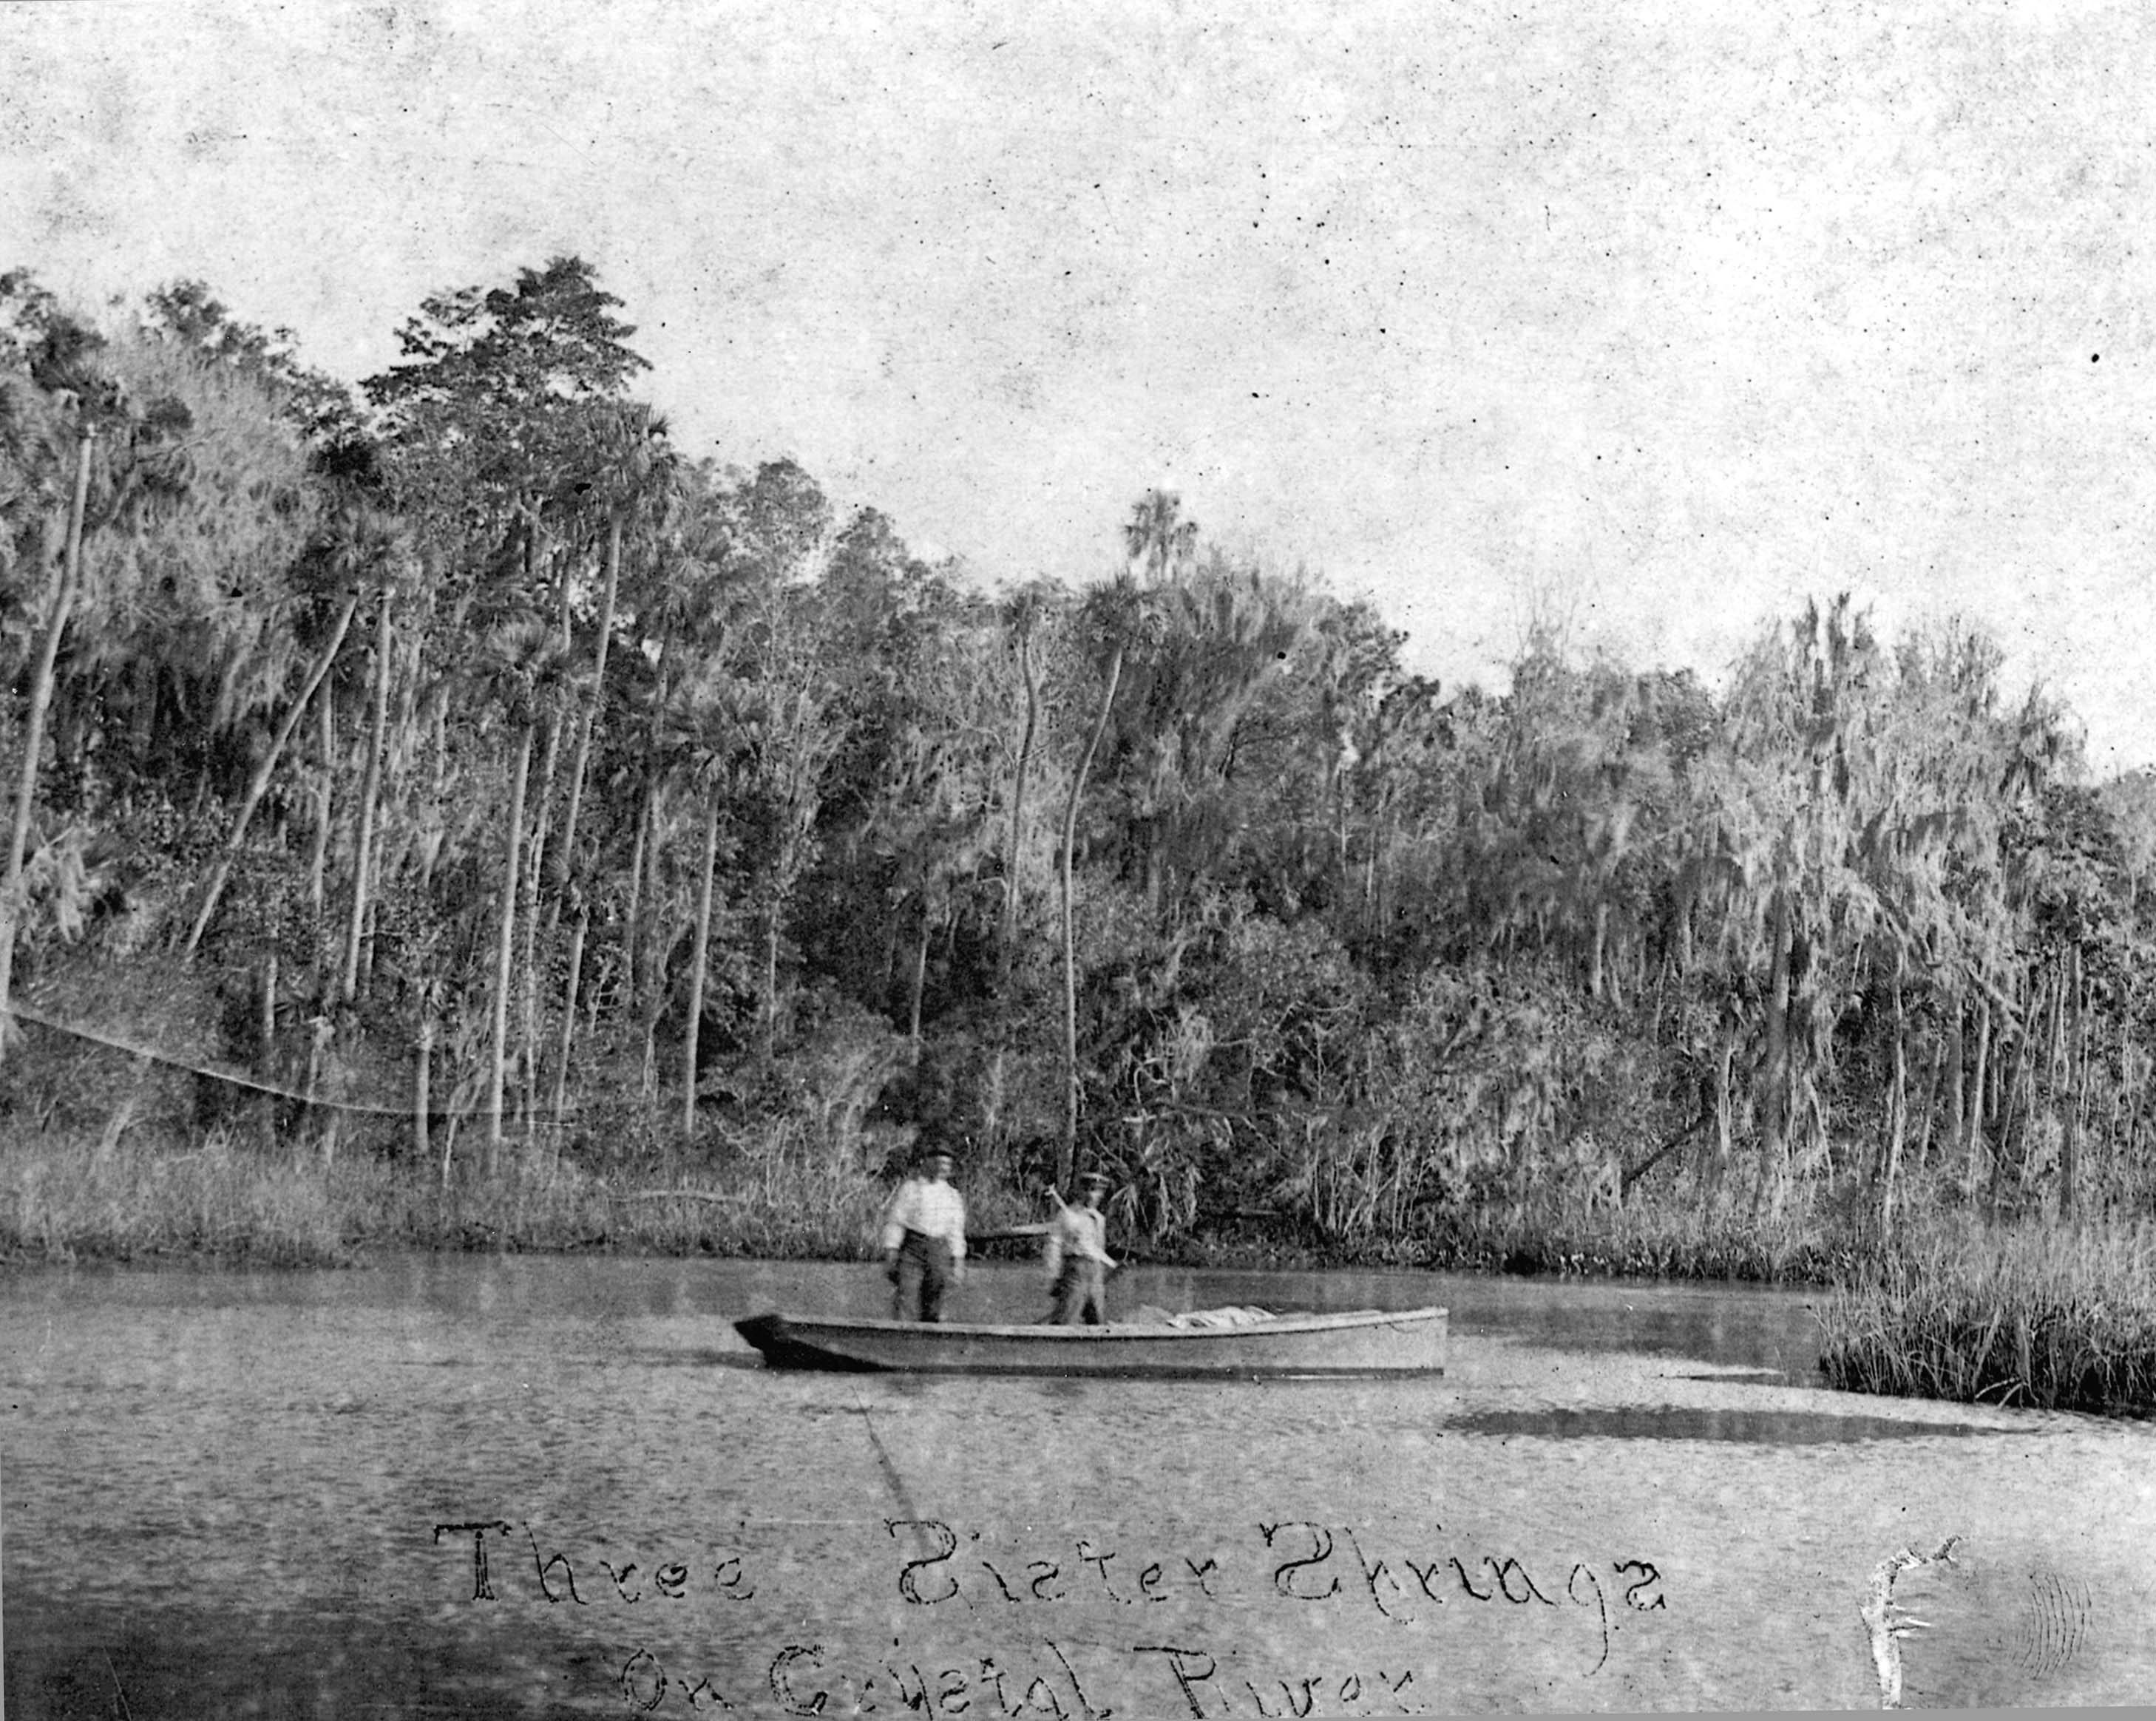 Historic image of Three Sisters Springs and two men on a boat 